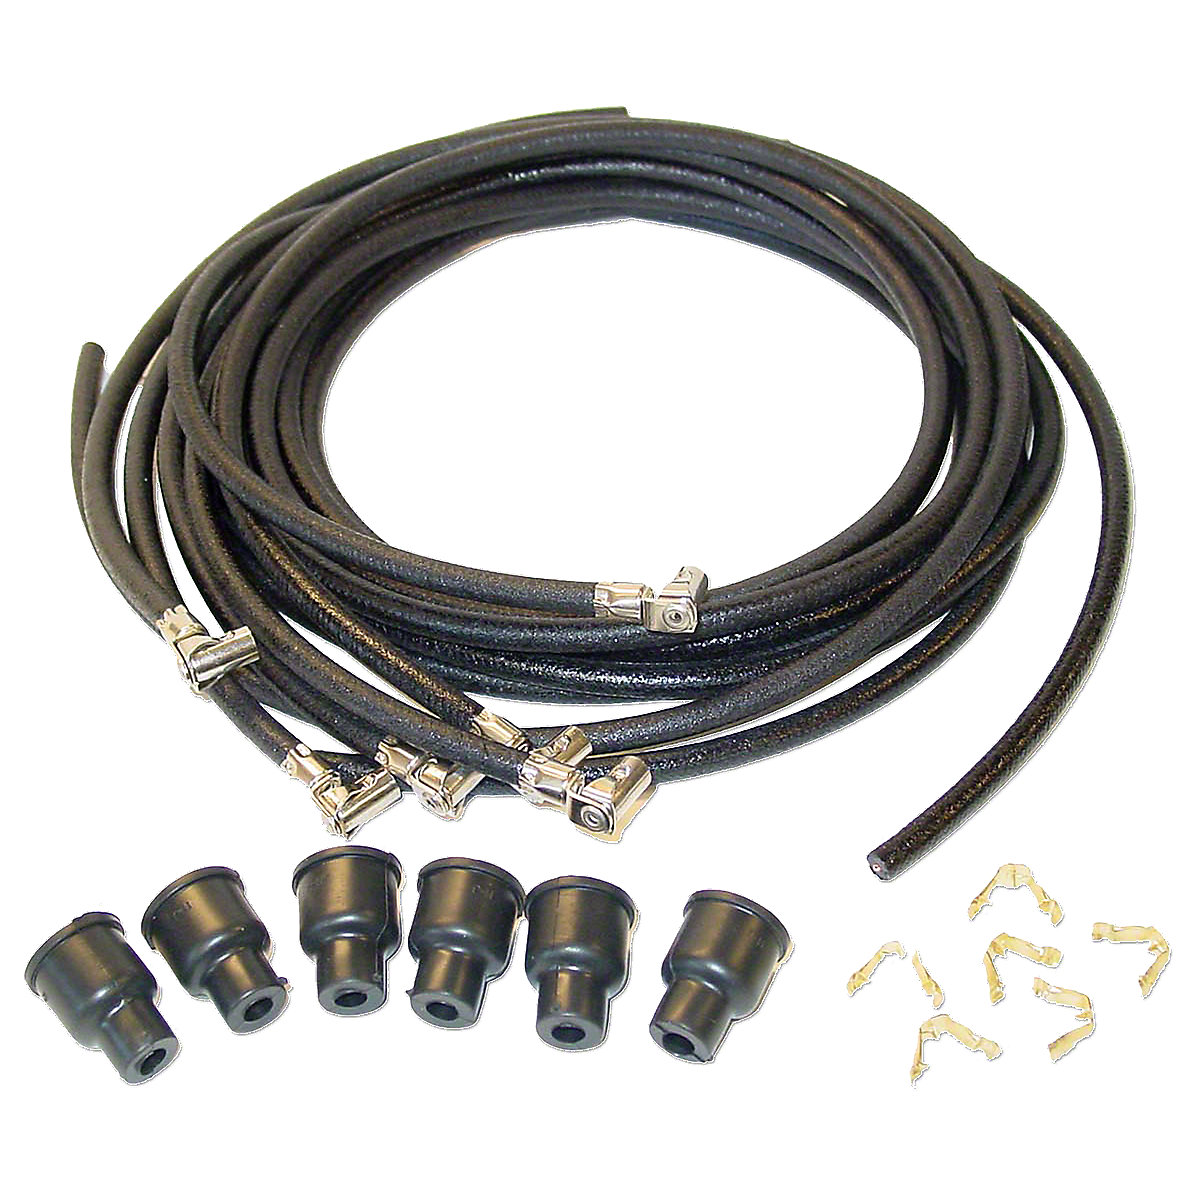 Spark Plug Wire Set For Oliver 70 Series With Magneto. Copper Core, Black Cotton Braid With Rajah Terminals. Made In The USA